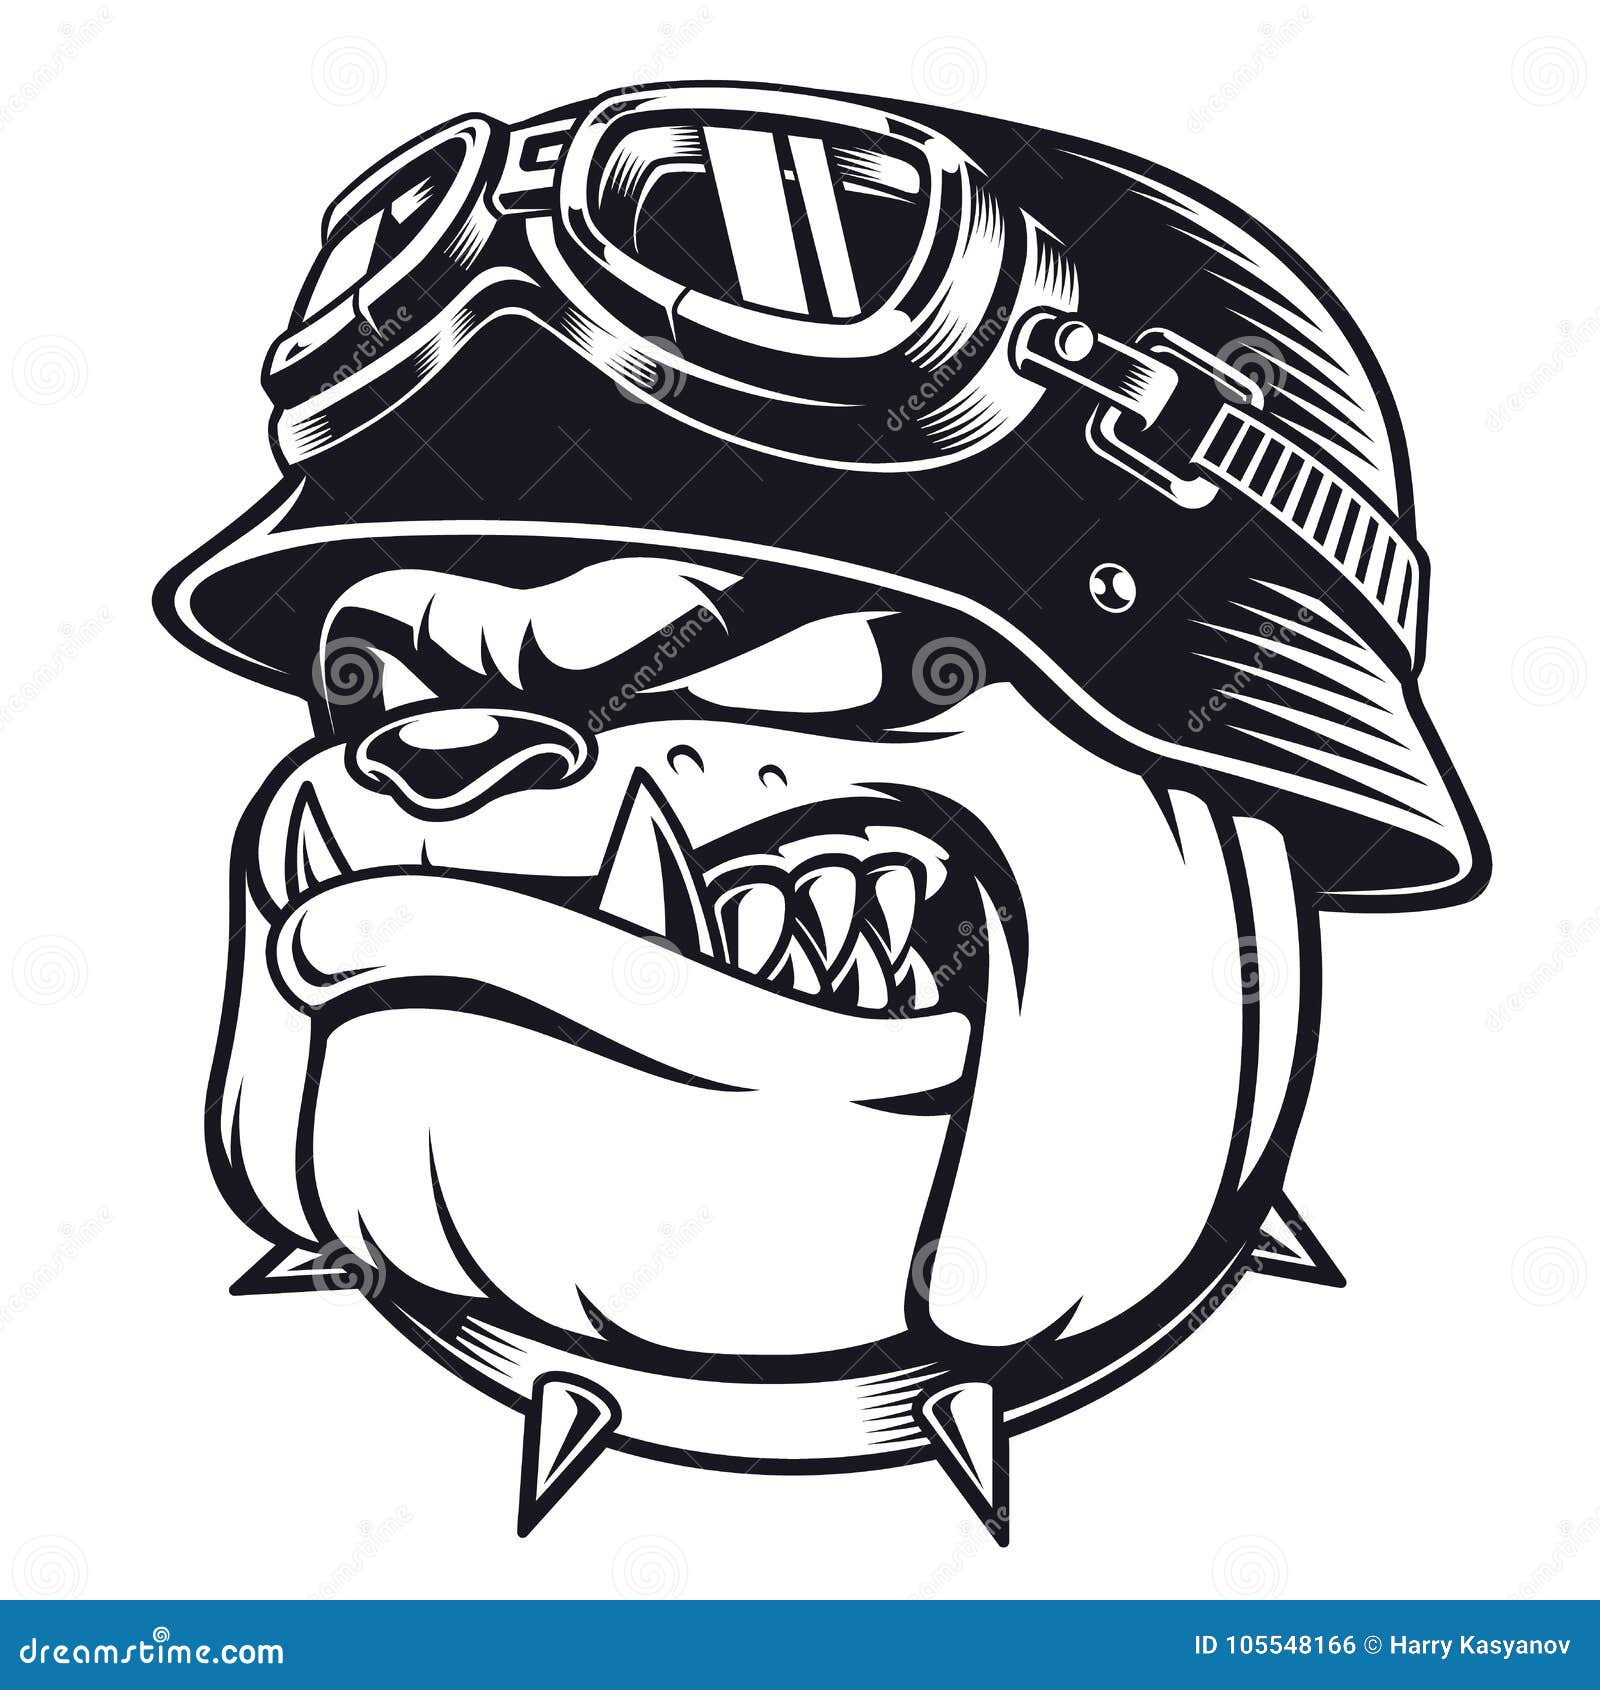 Bulldog Cartoons, Illustrations & Vector Stock Images - 7990 Pictures